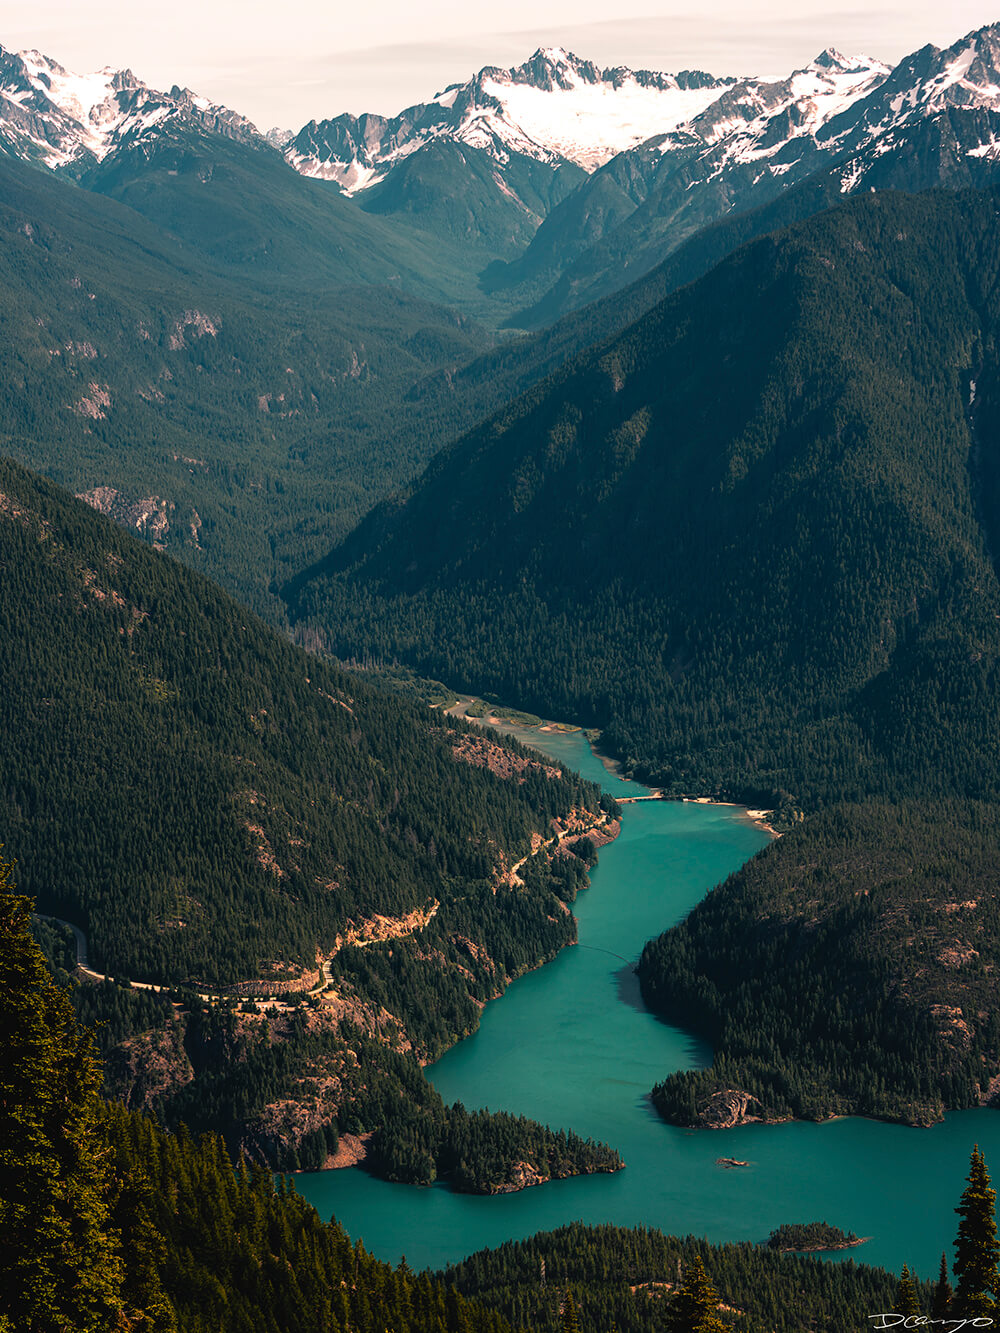 Landscape and portrait photos from a July 2020 trip to the North Cascades. Sourdough Mountain, Diablo Lake, Ross Lake and more.